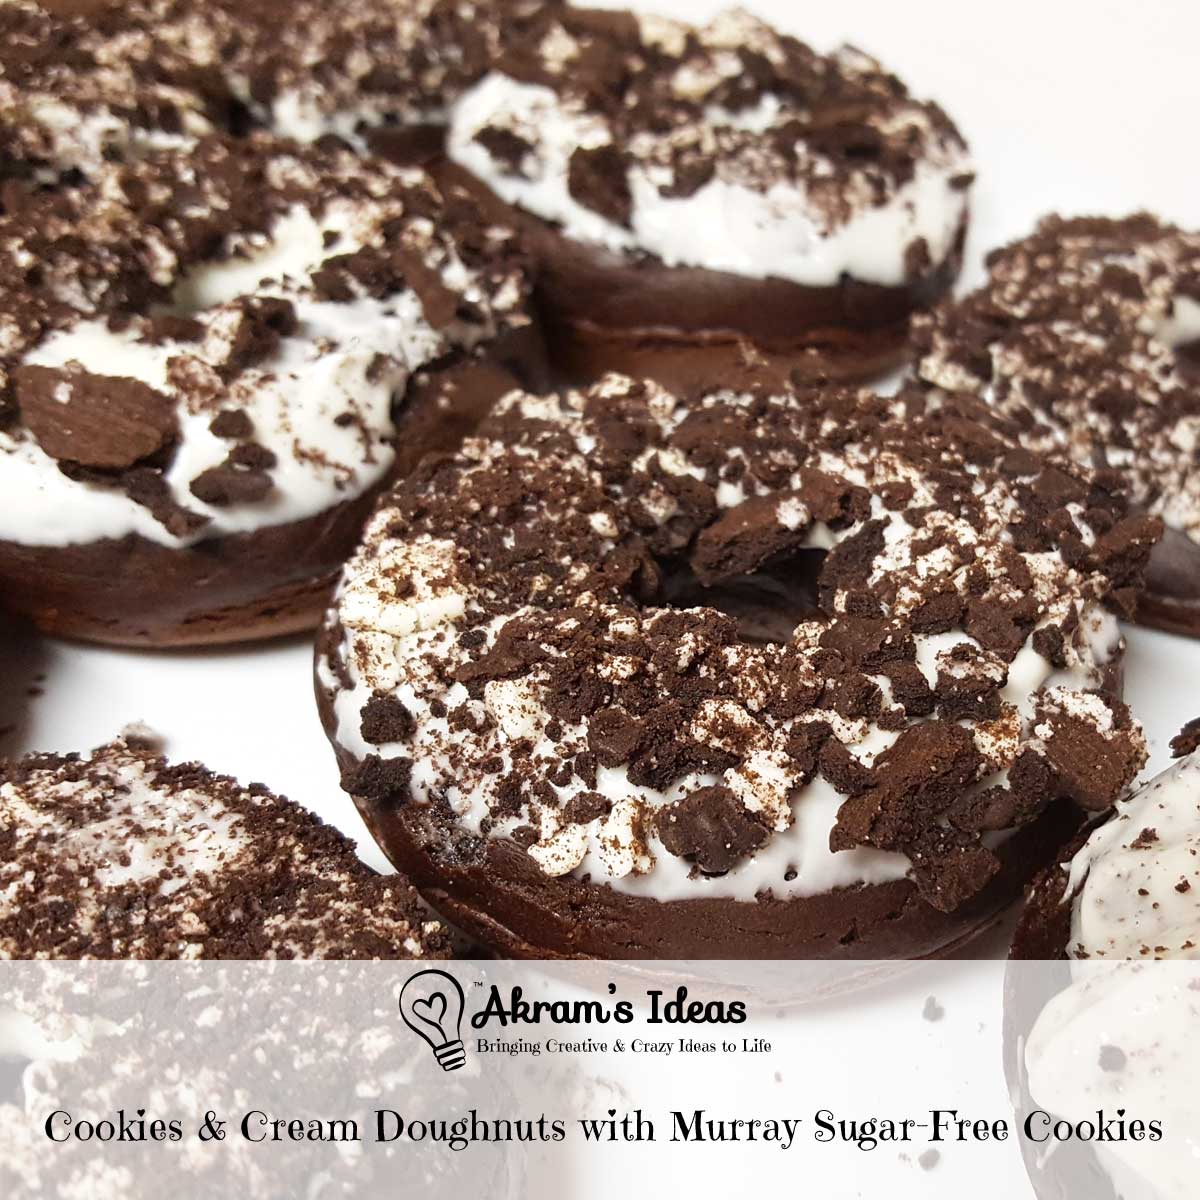 Recipe for homemade cookies & cream doughnuts featuring sugar free Murray chocolate sandwich cookies and chocolate Lactaid milk.